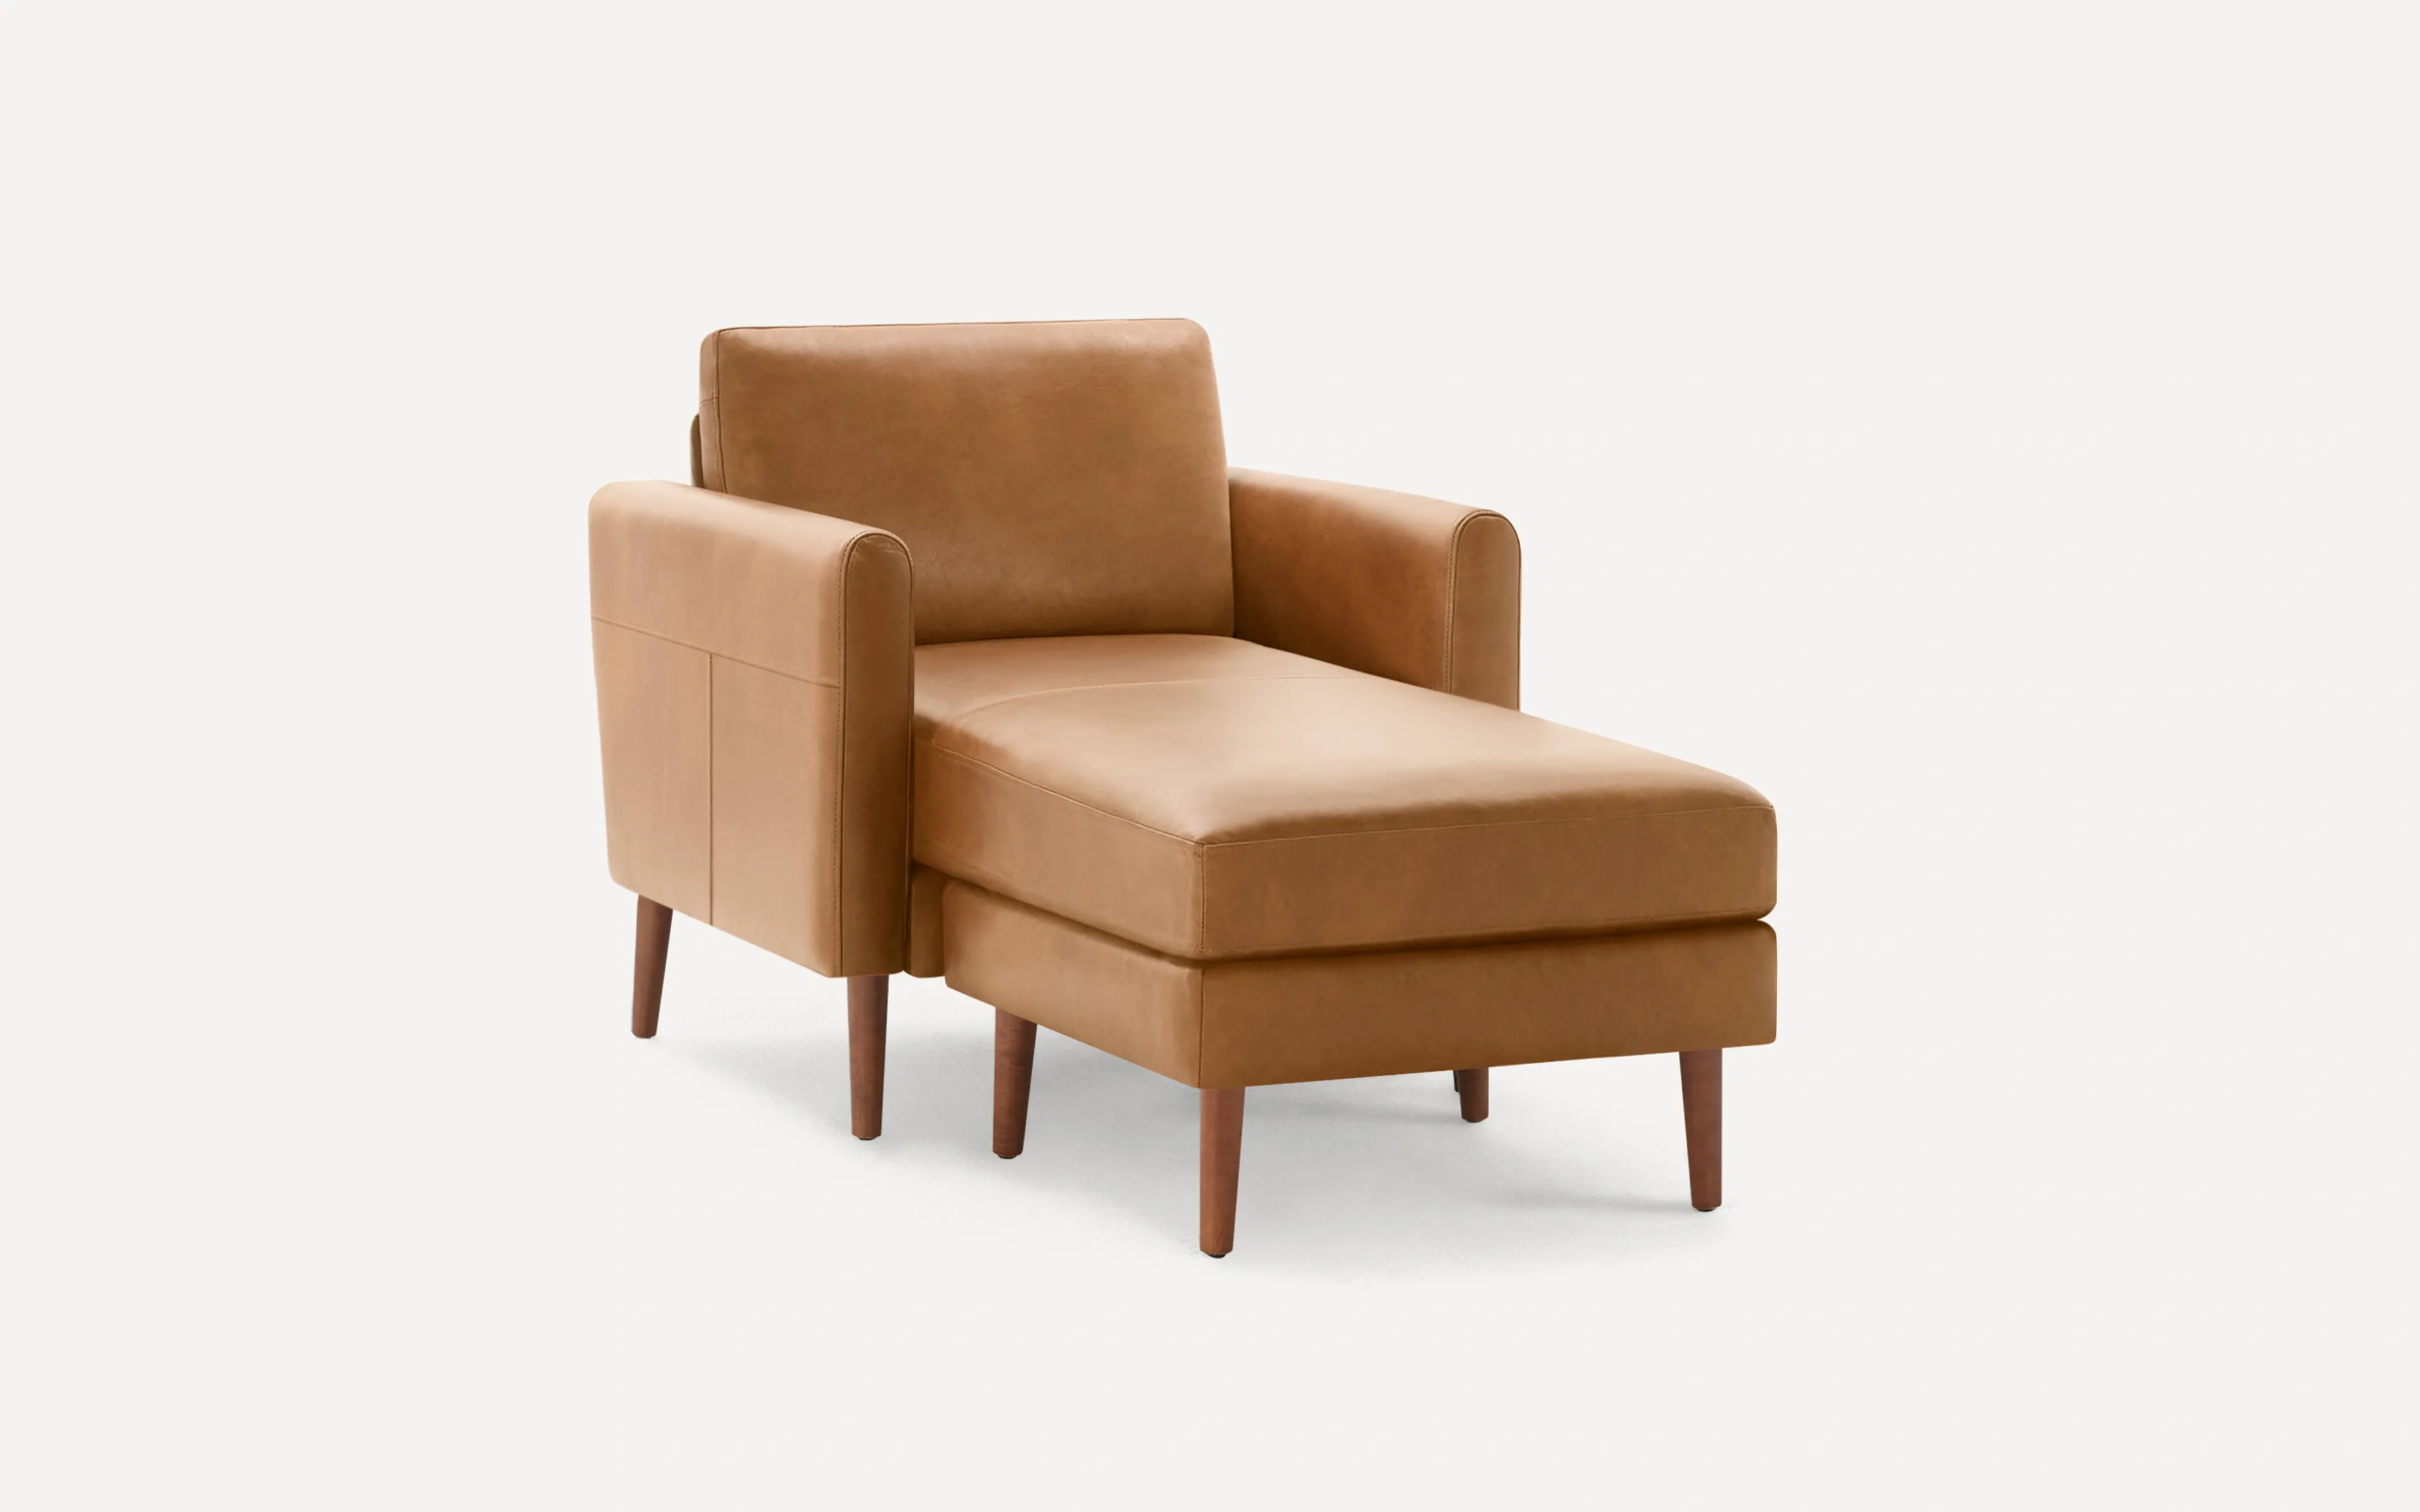 Original Nomad Chaise Armchair in Camel Leather